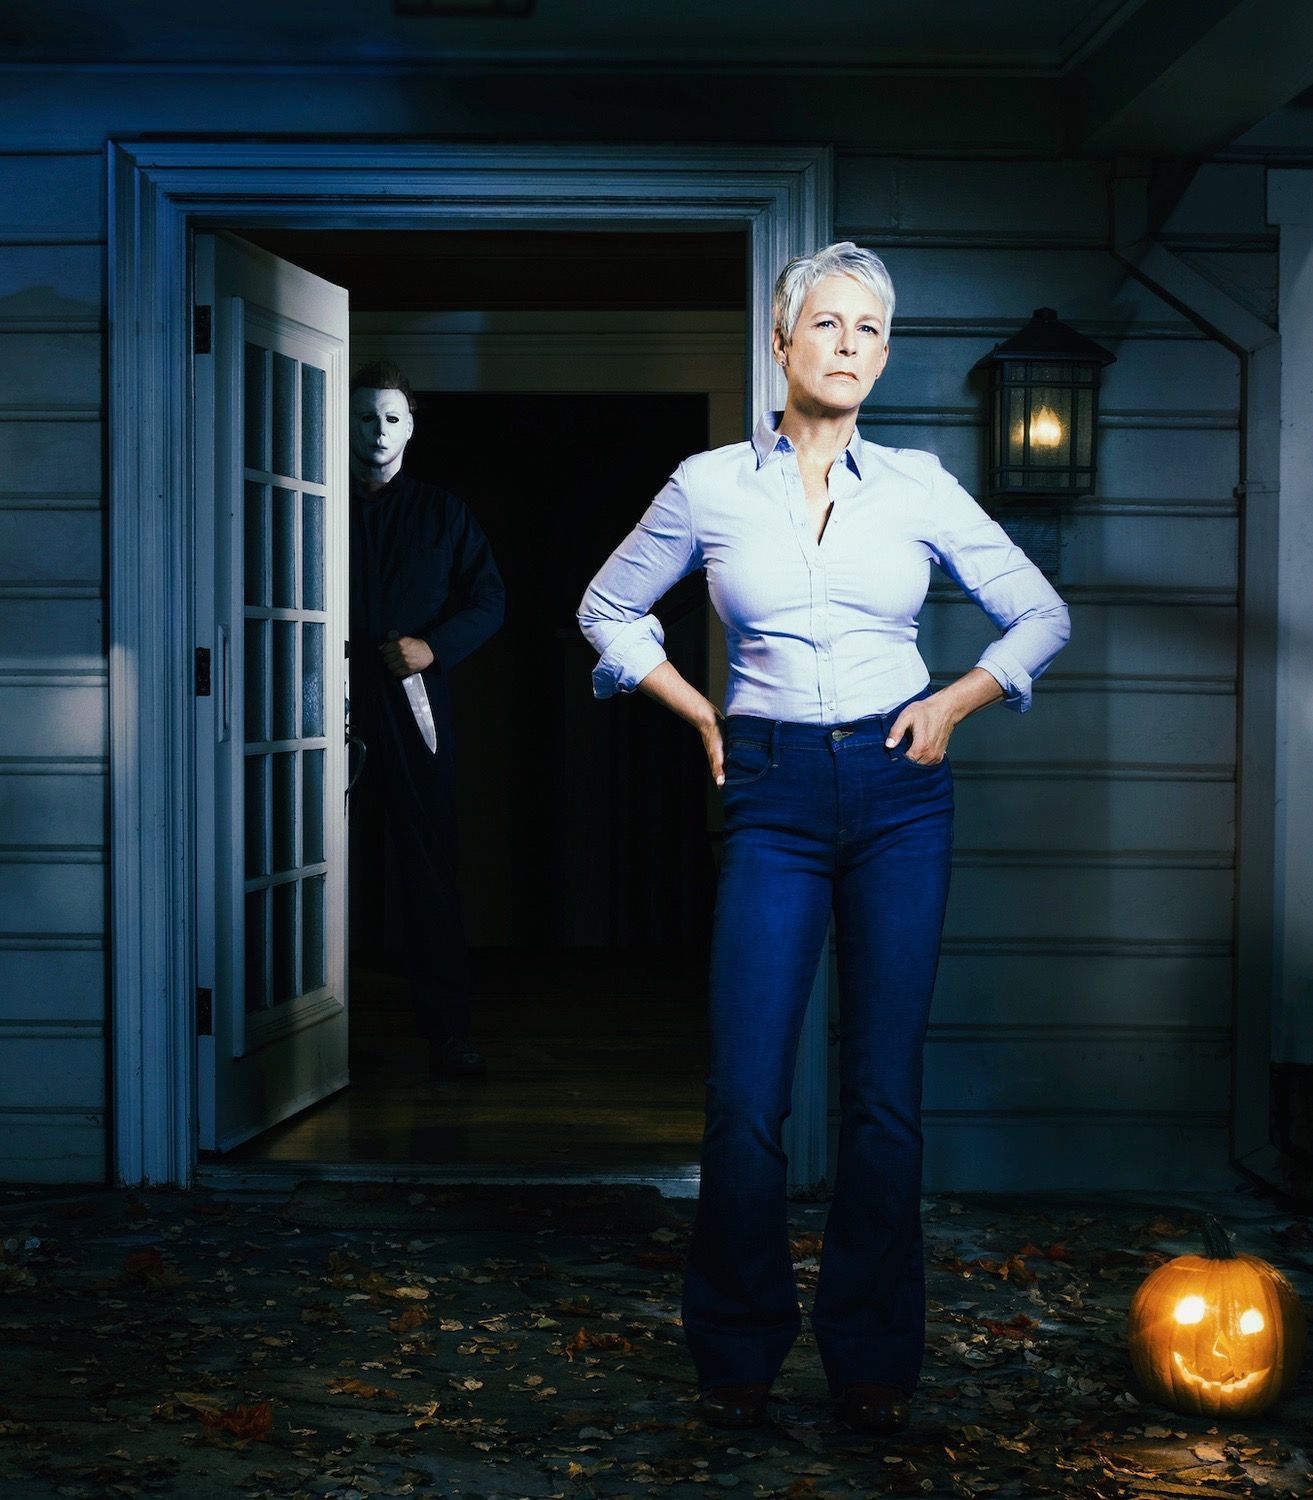 Laurie Strode and Michael Myers in Halloween Vertical TLDR